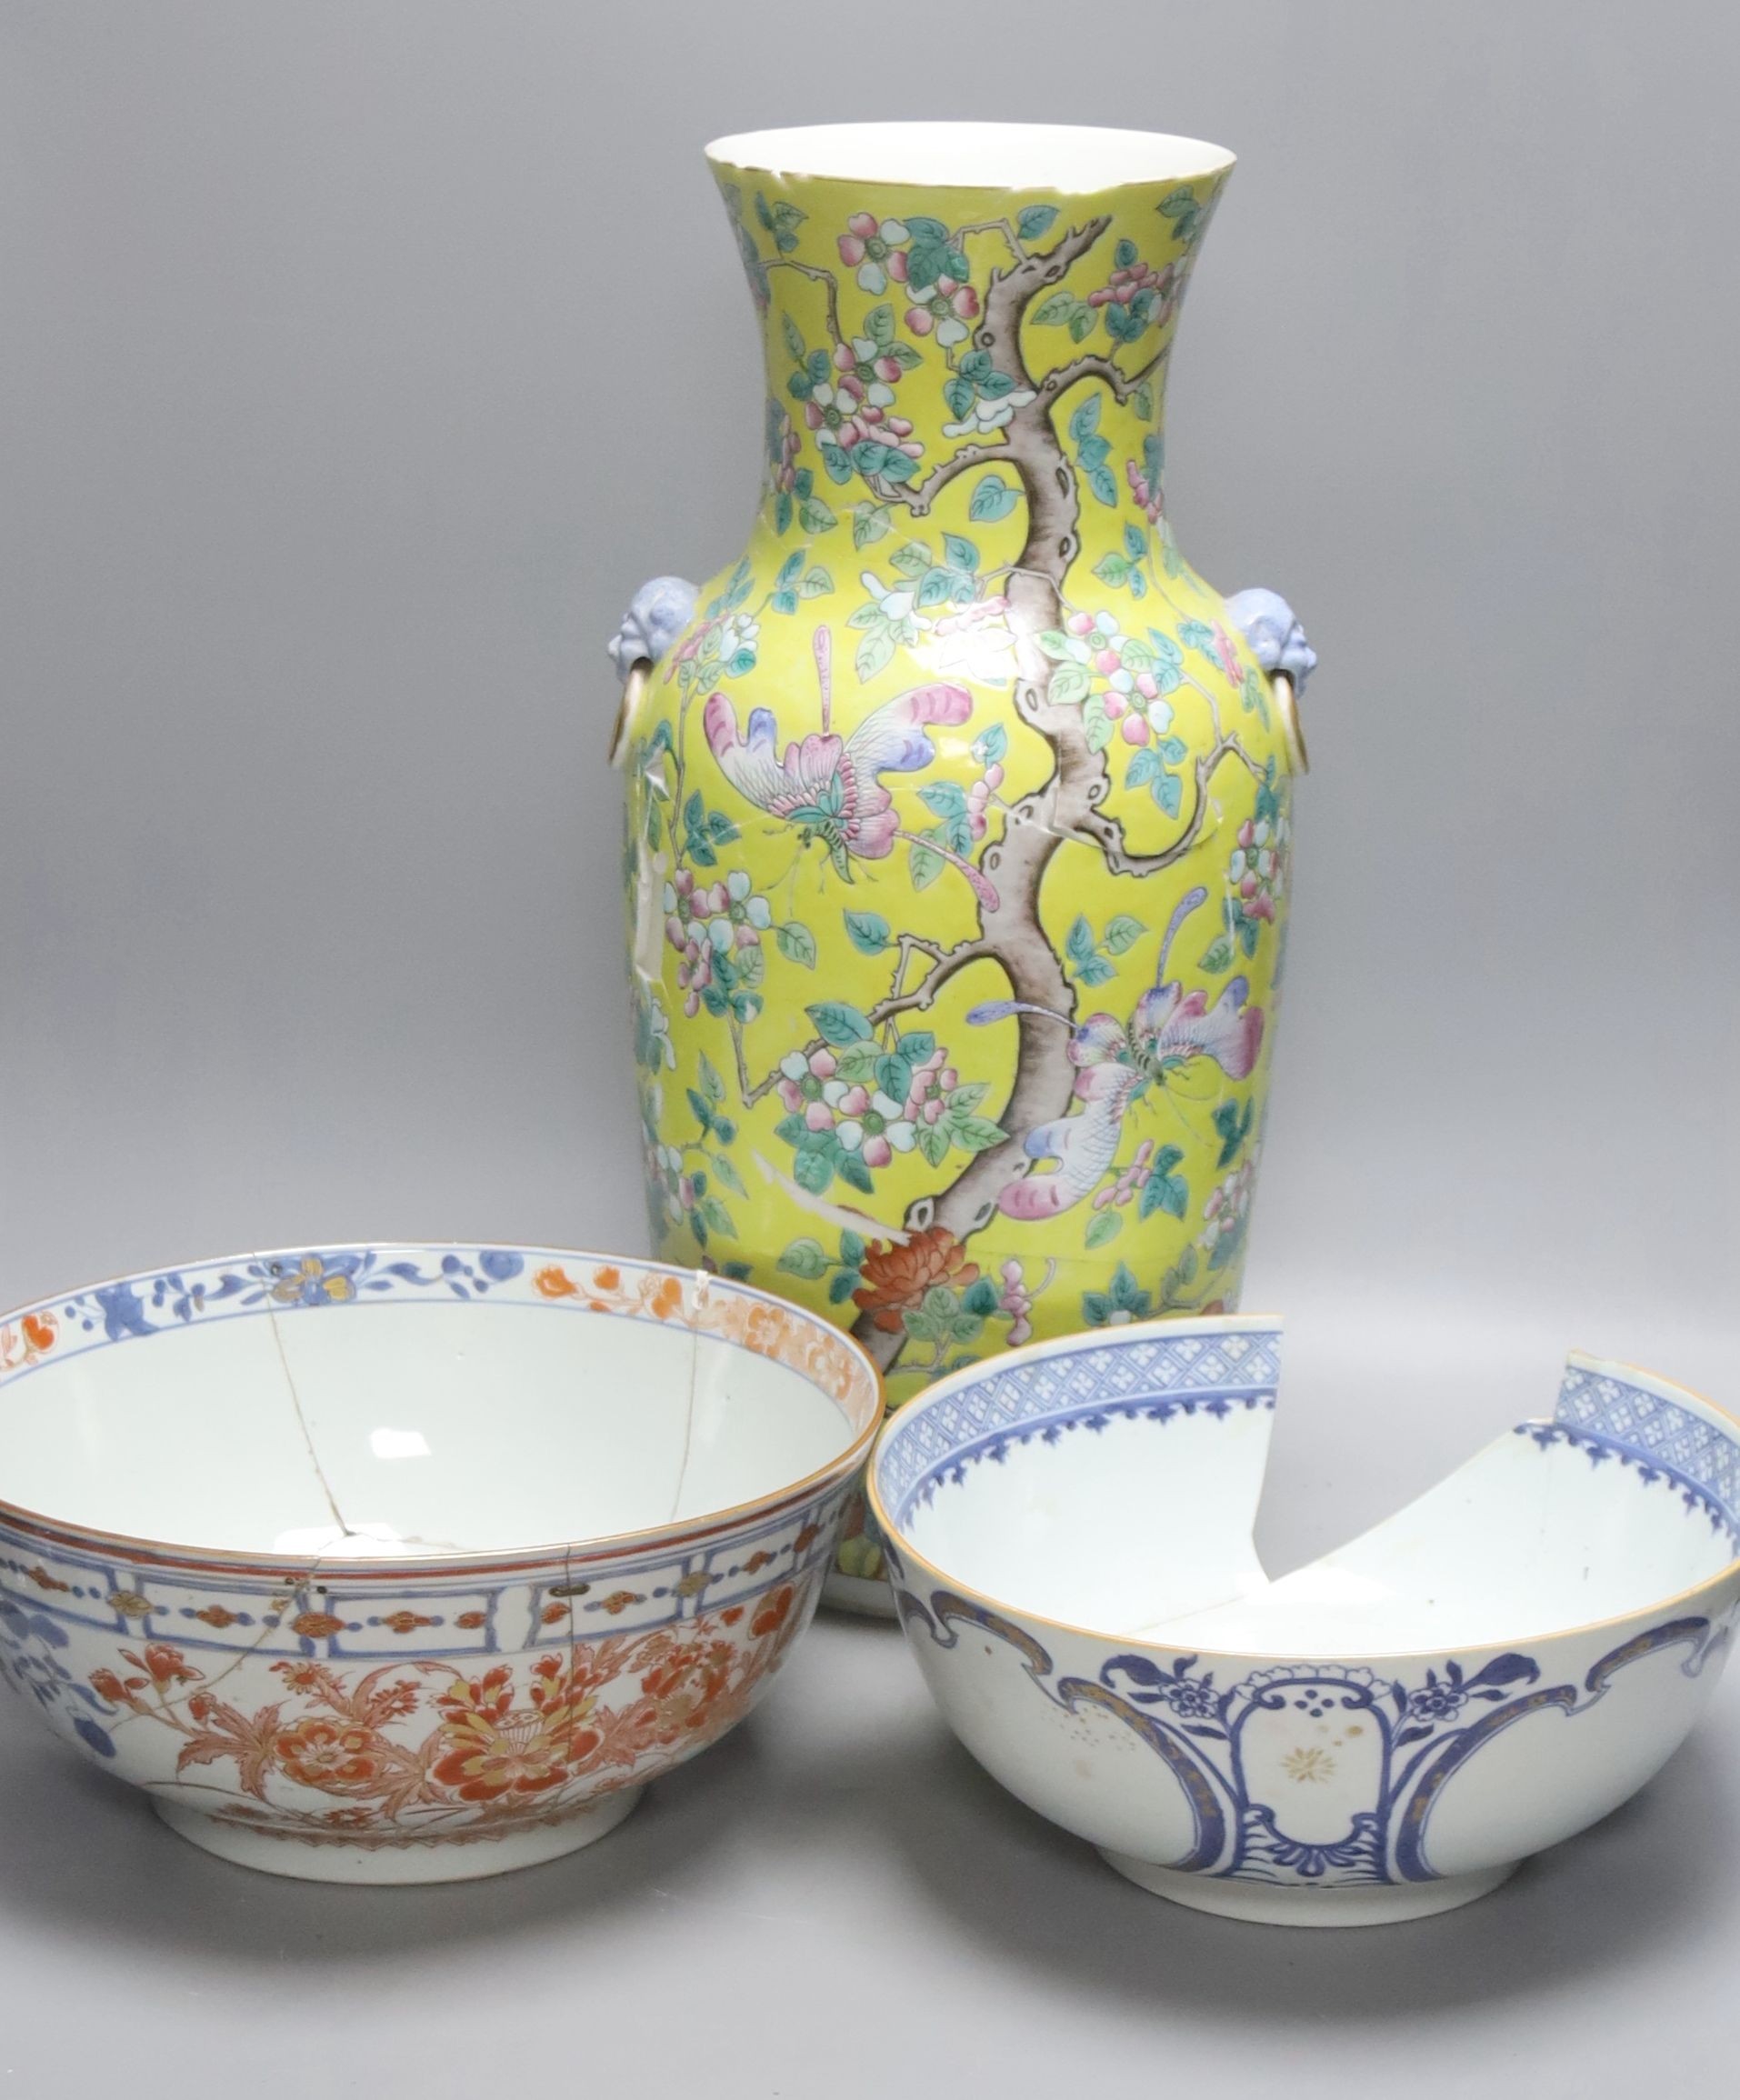 A large 19th century Chinese yellow ground vase and two 18th century Chinese porcelain bowls, diameter 26cm (a.f)